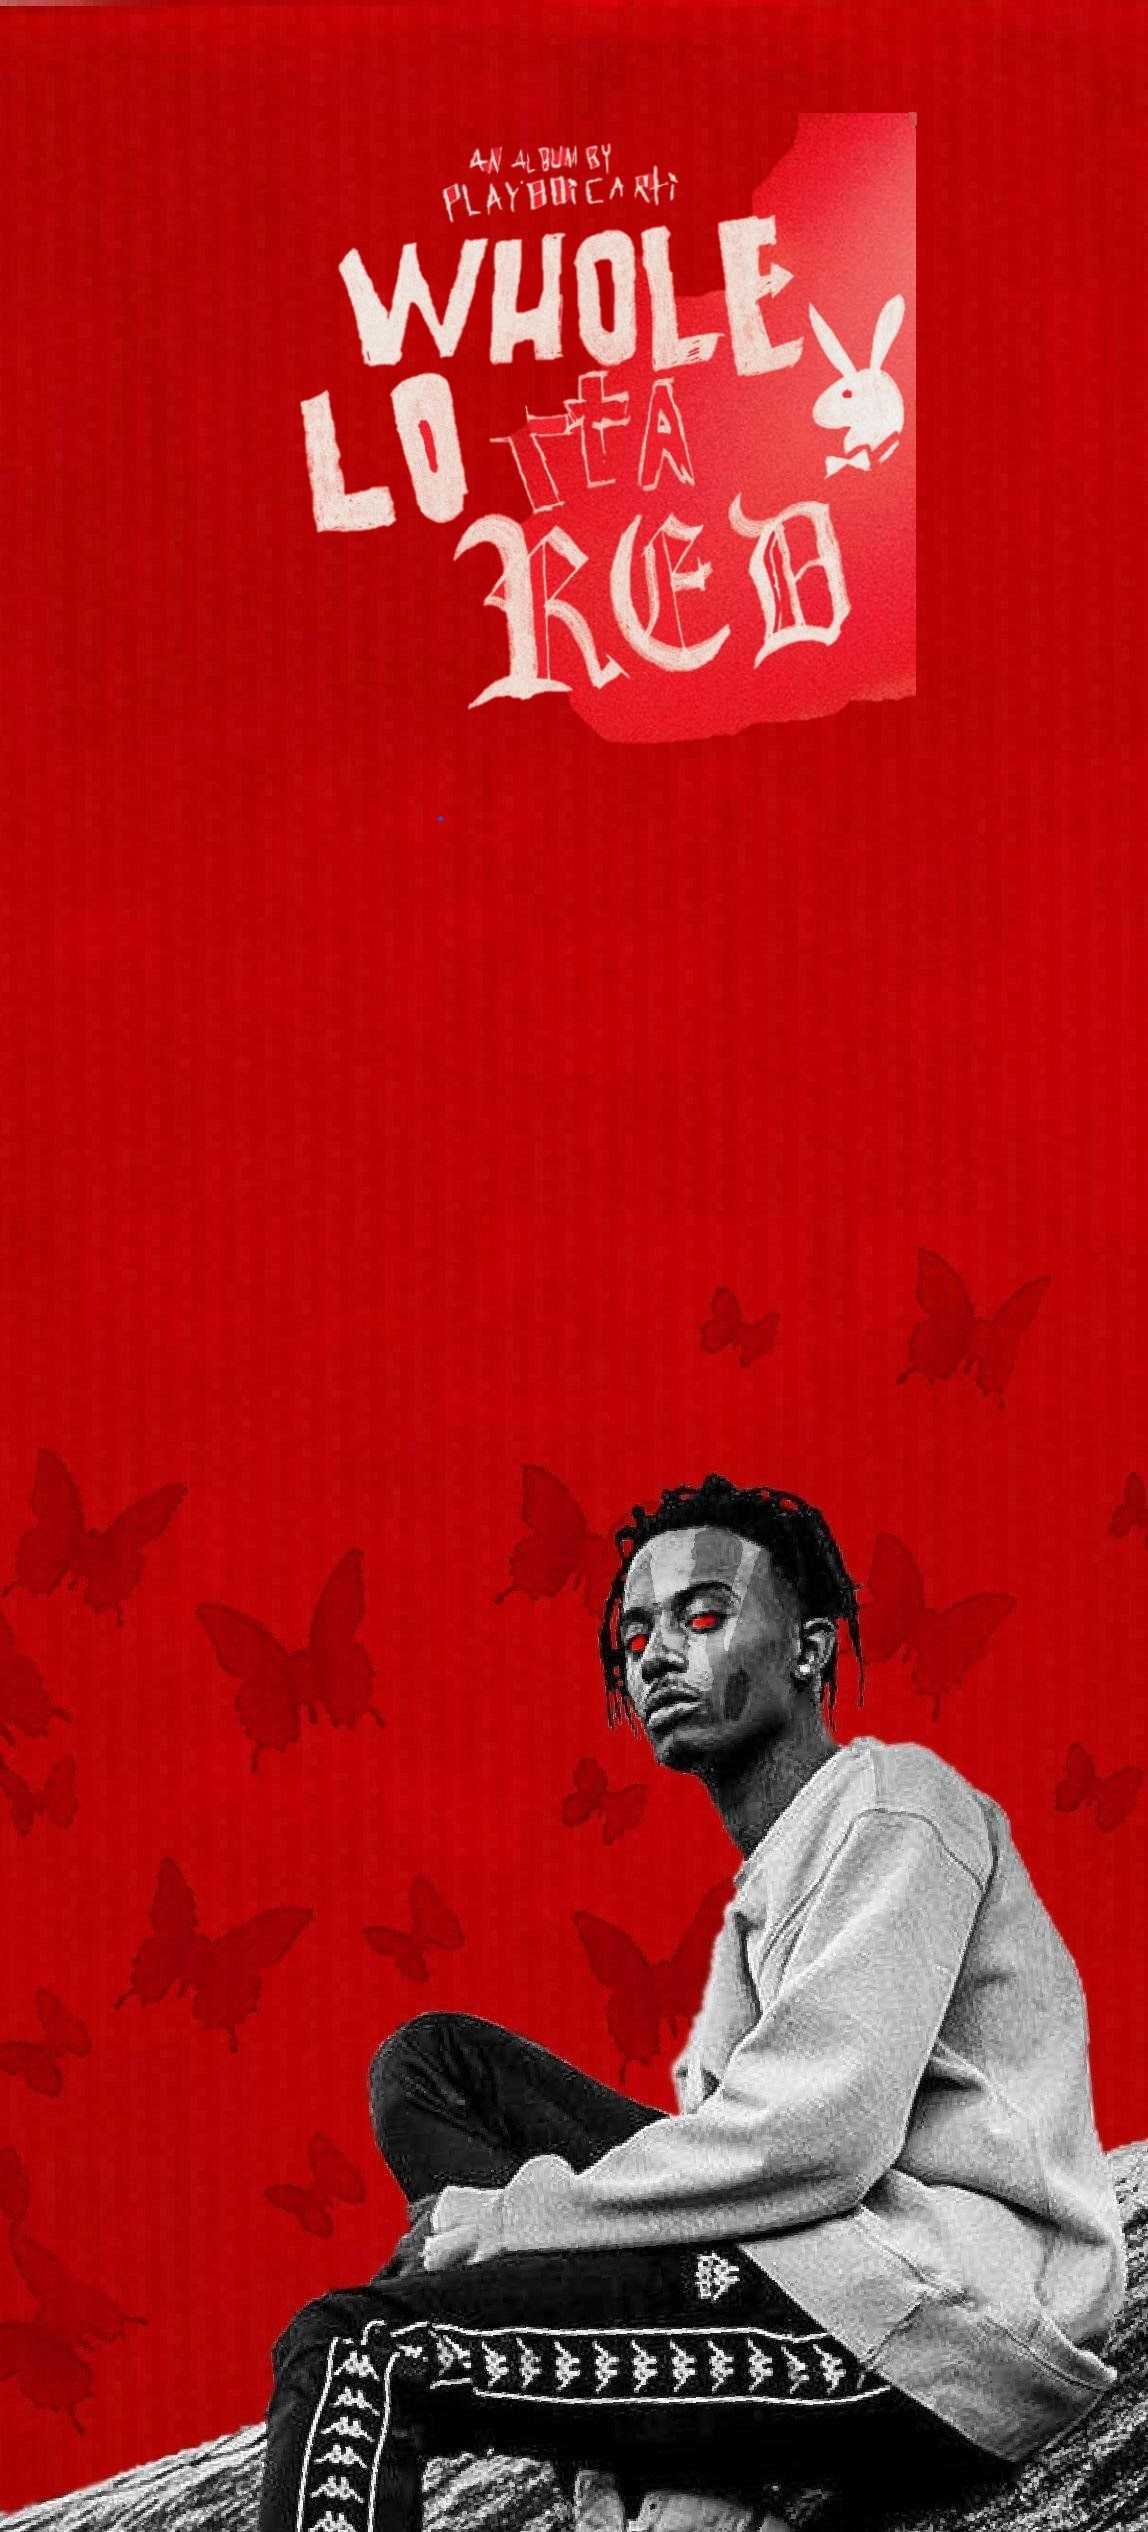 Whole Lotta Red Background